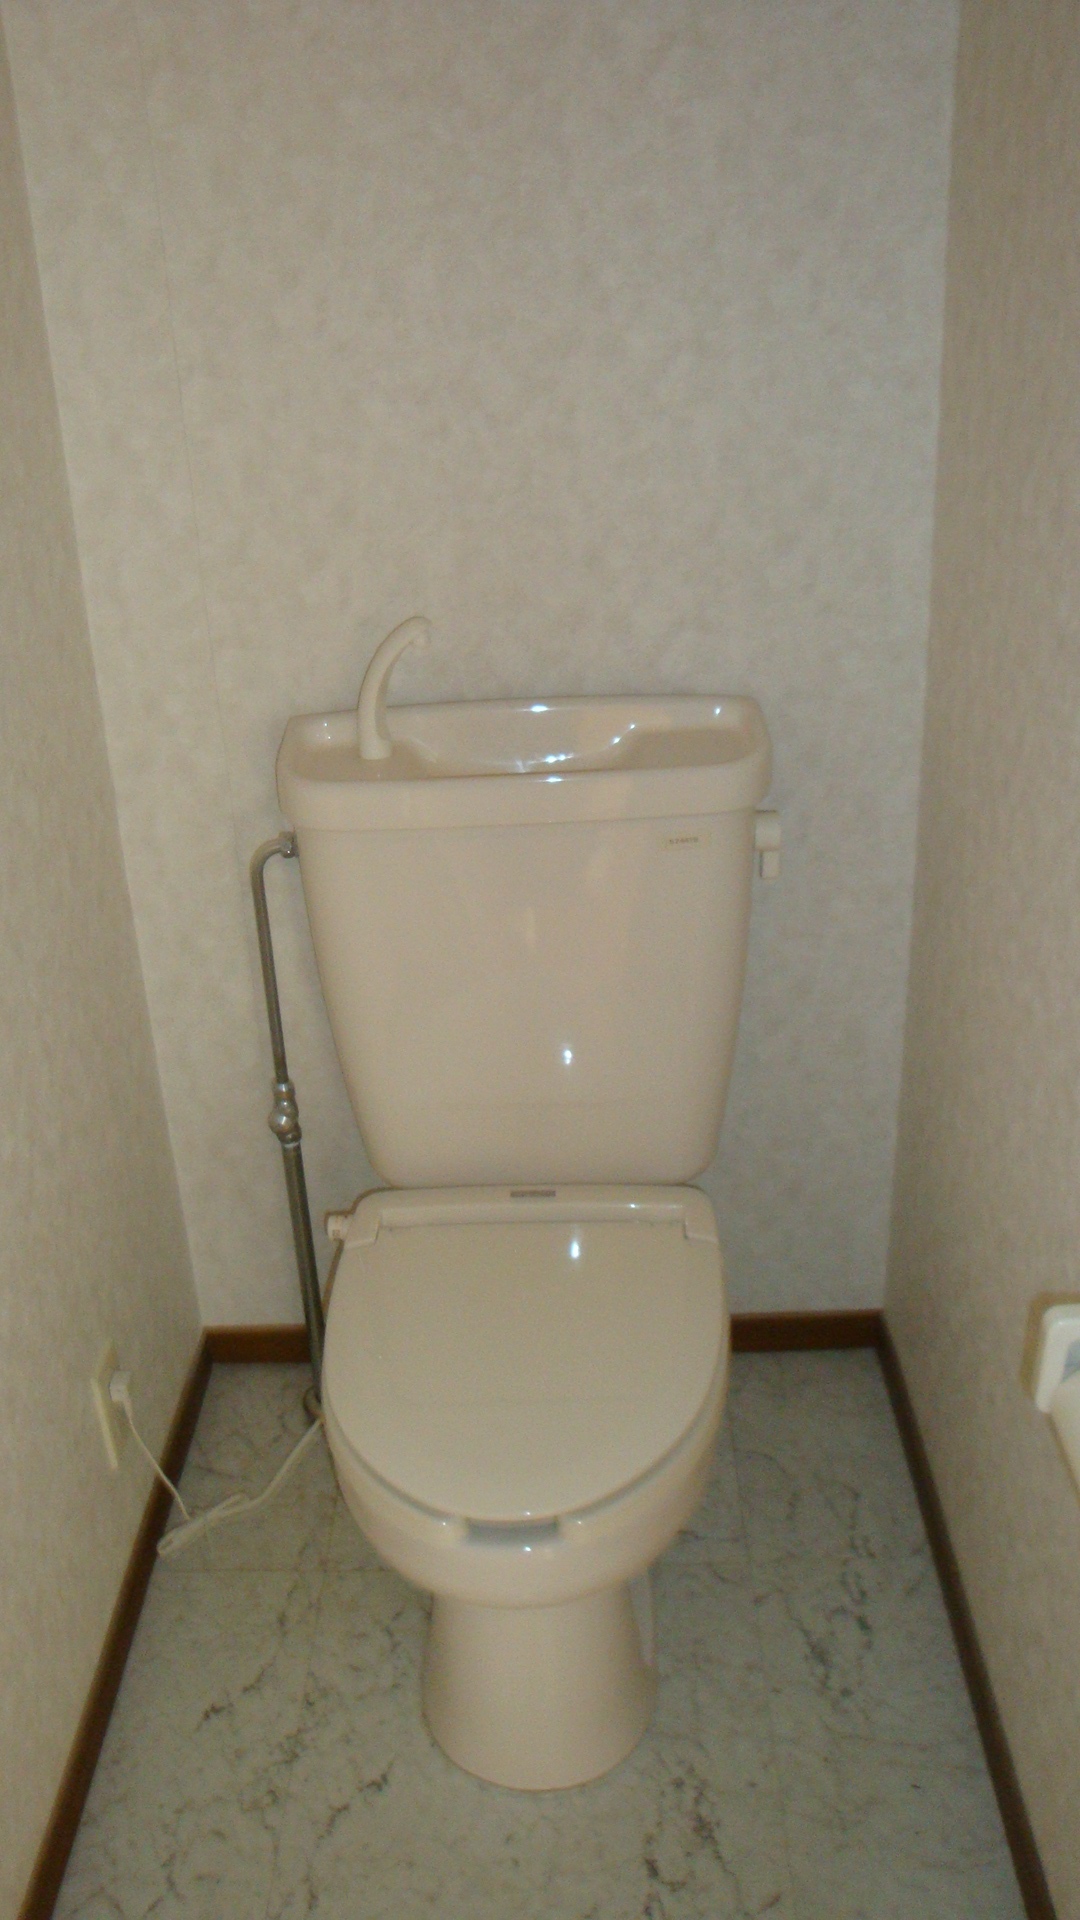 Toilet. Toilet is a toilet seat with heating